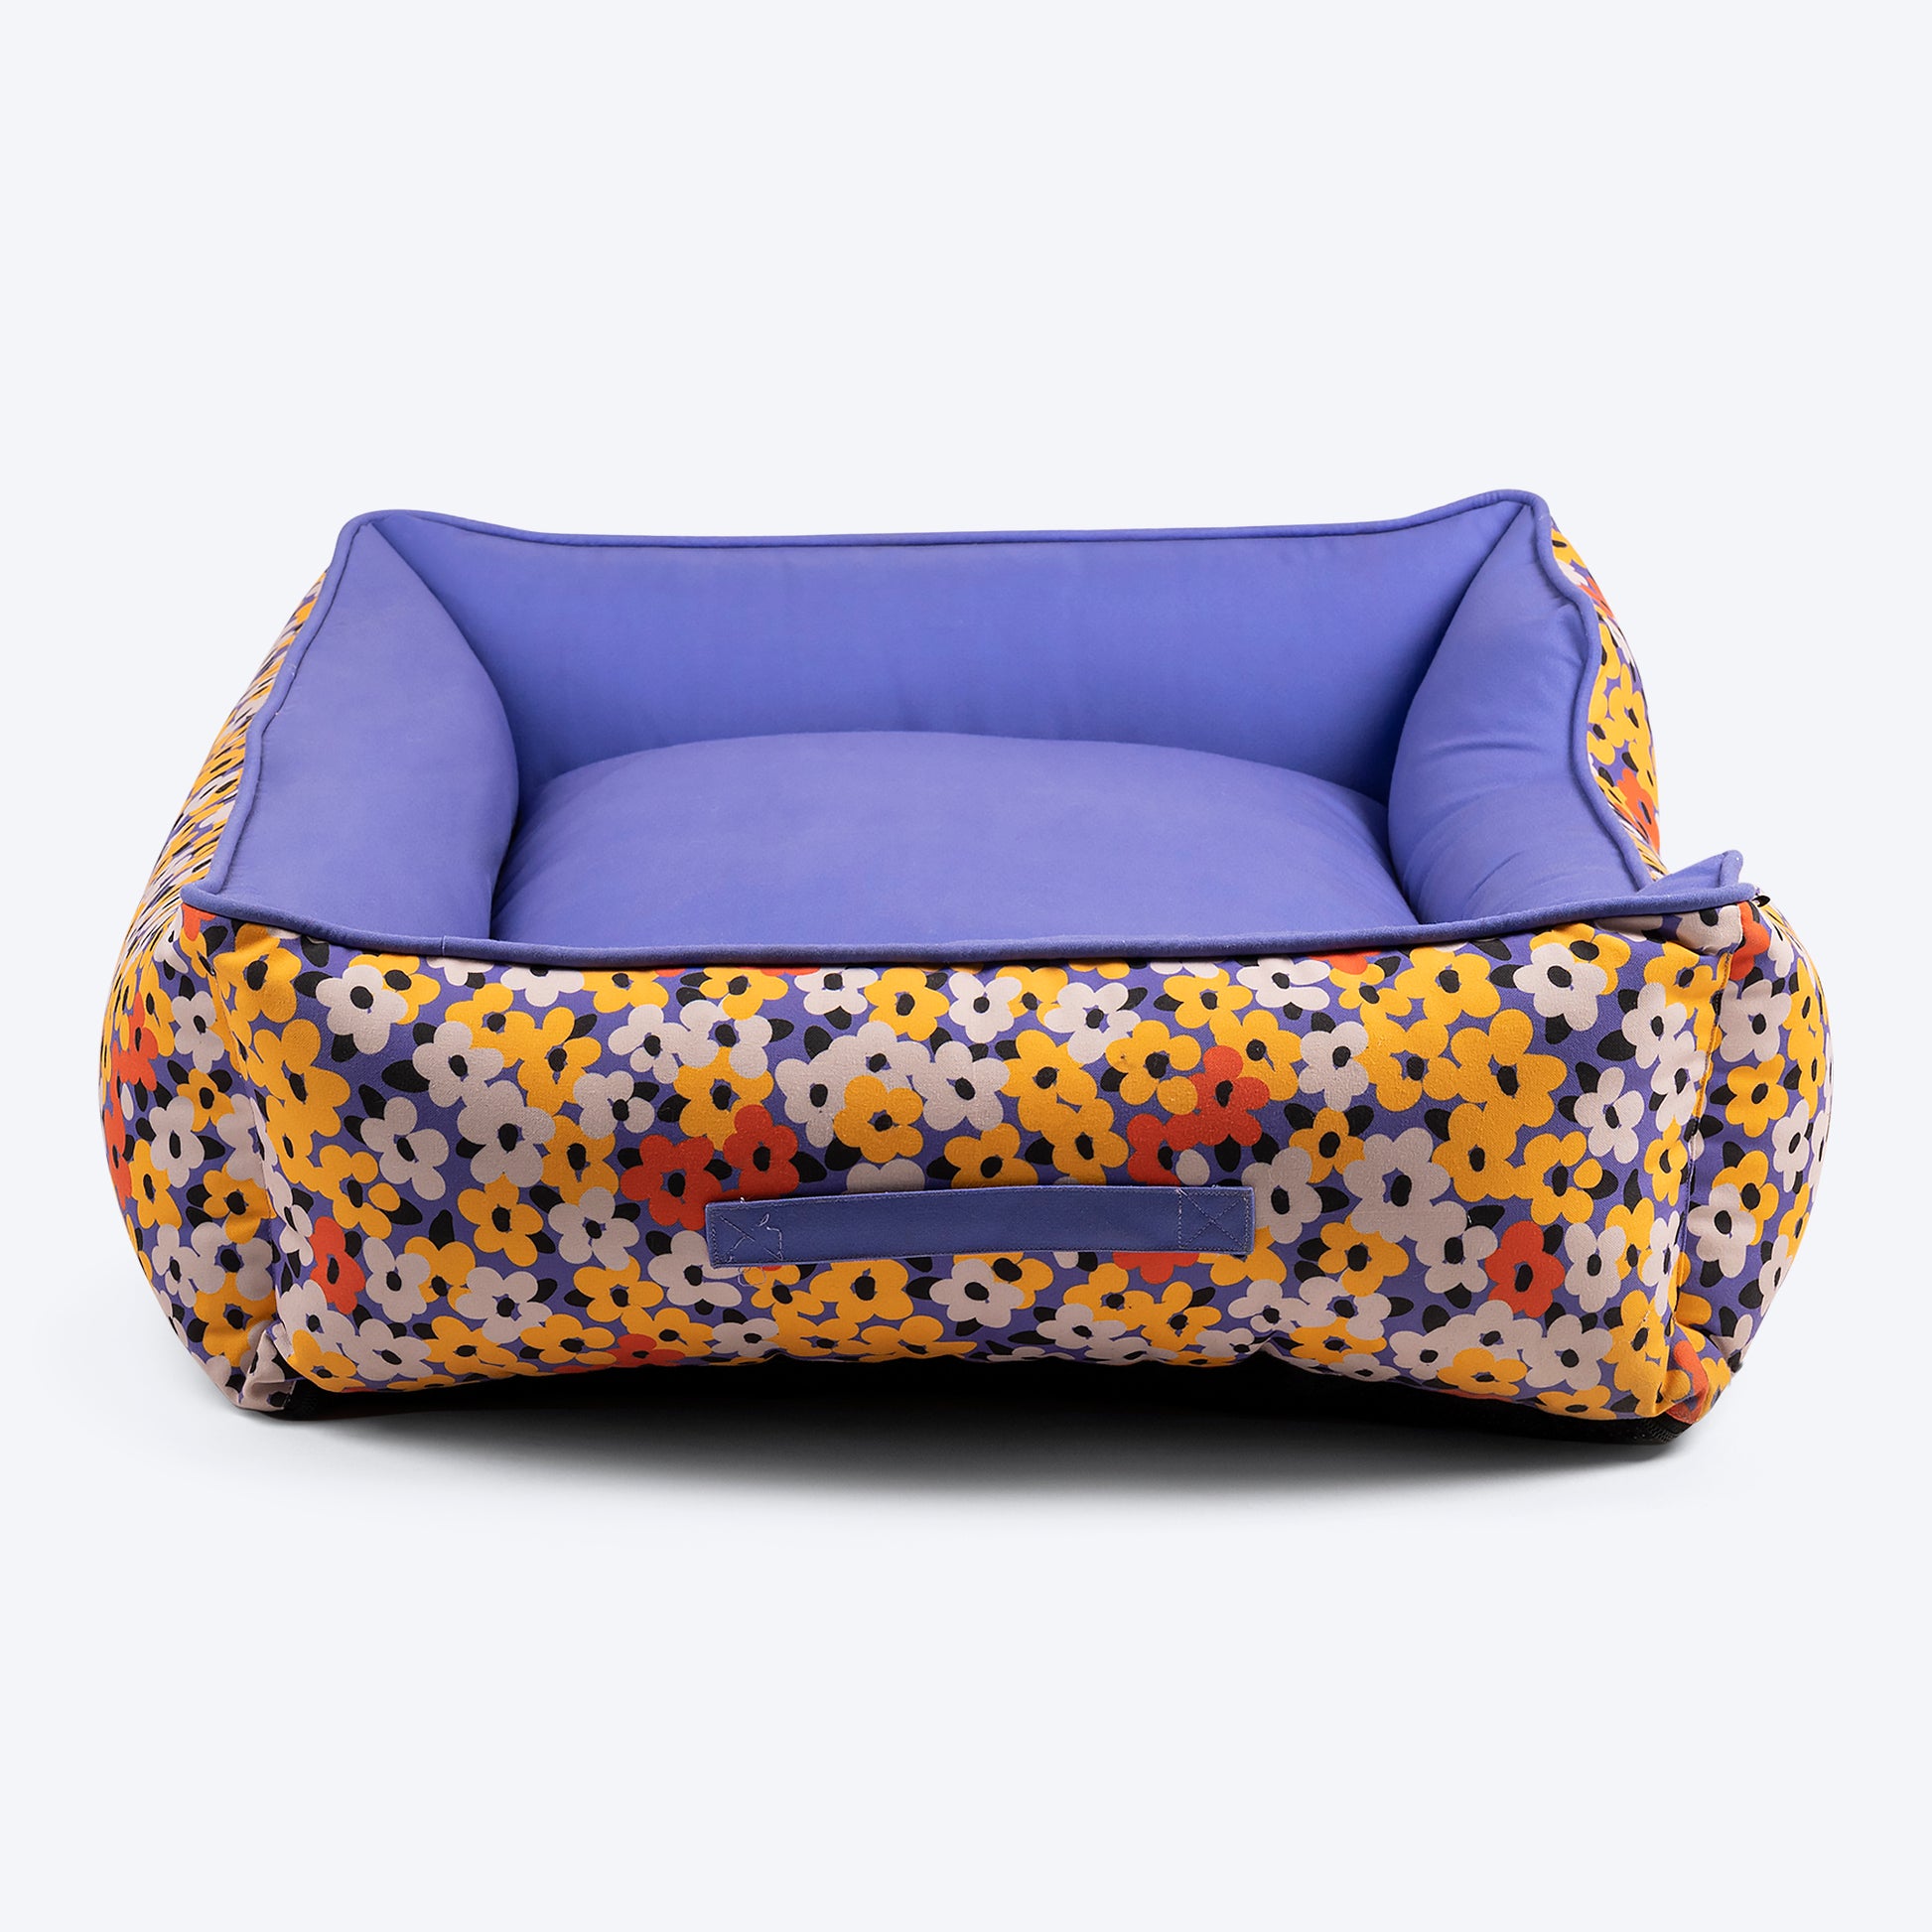 HUFT Personalised Misfit Meadow Lounger Dog Bed - Purple_02